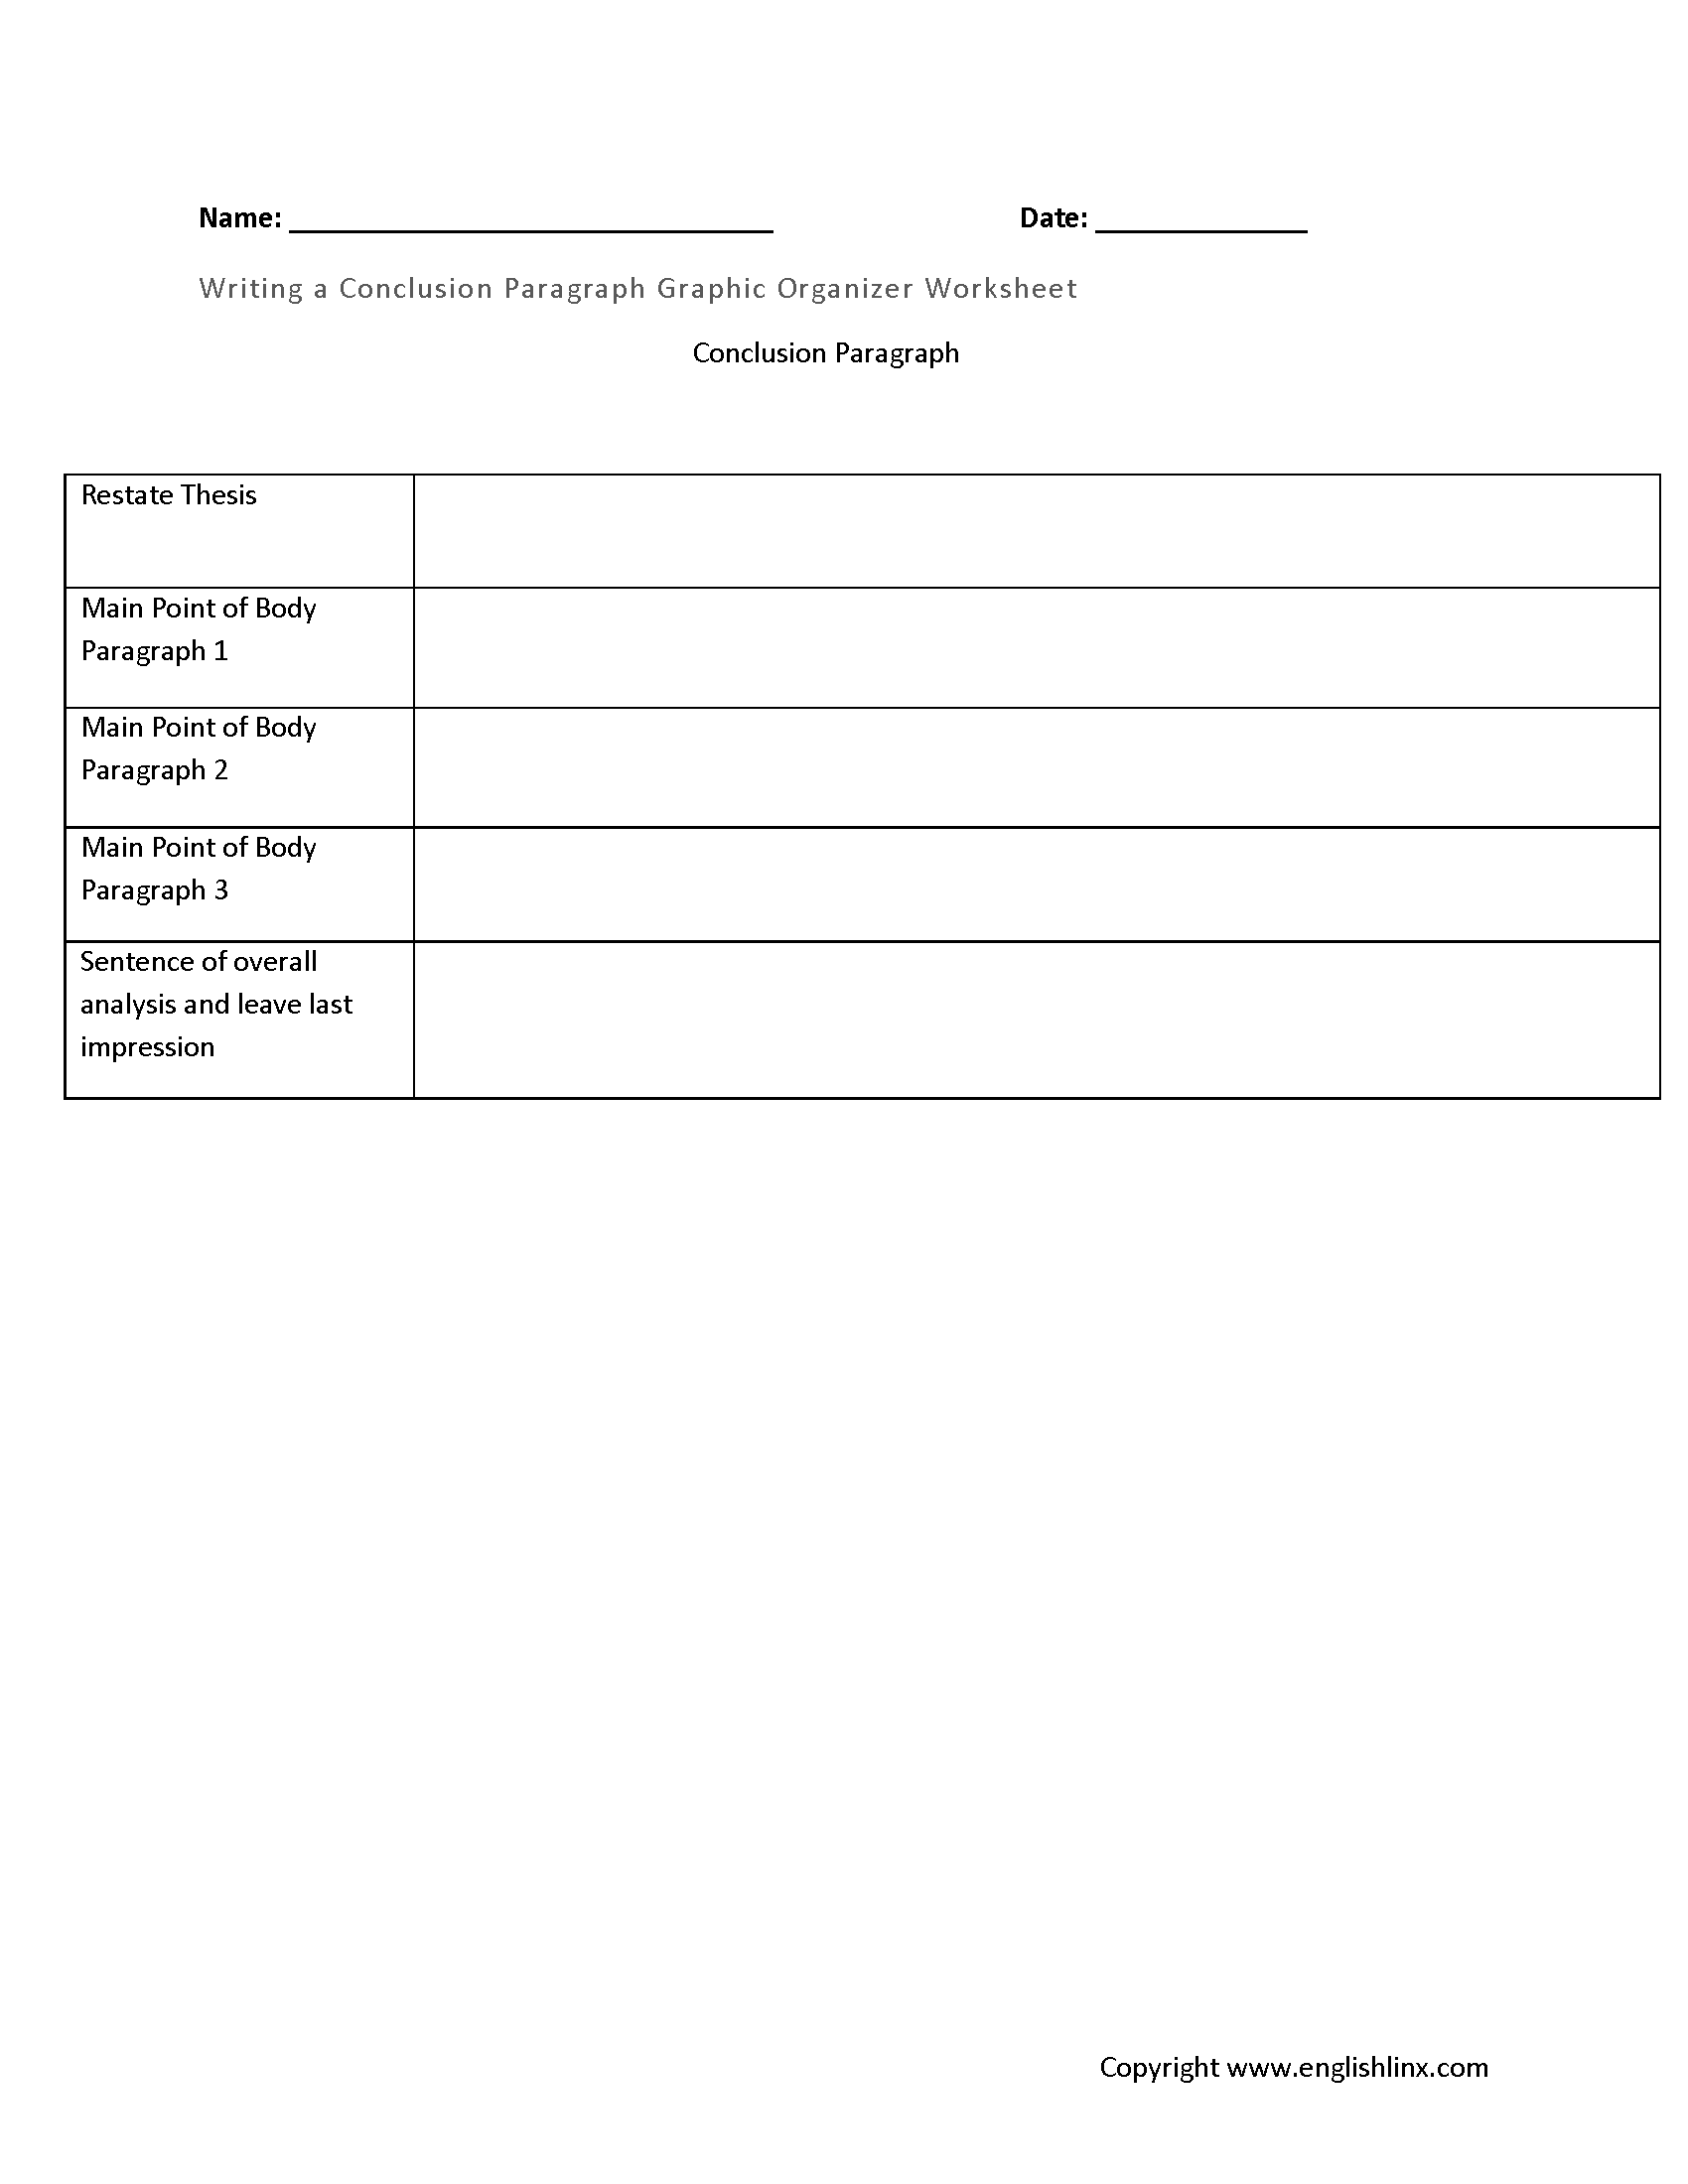 Writing Conclusions Graphic Organizers Worksheets